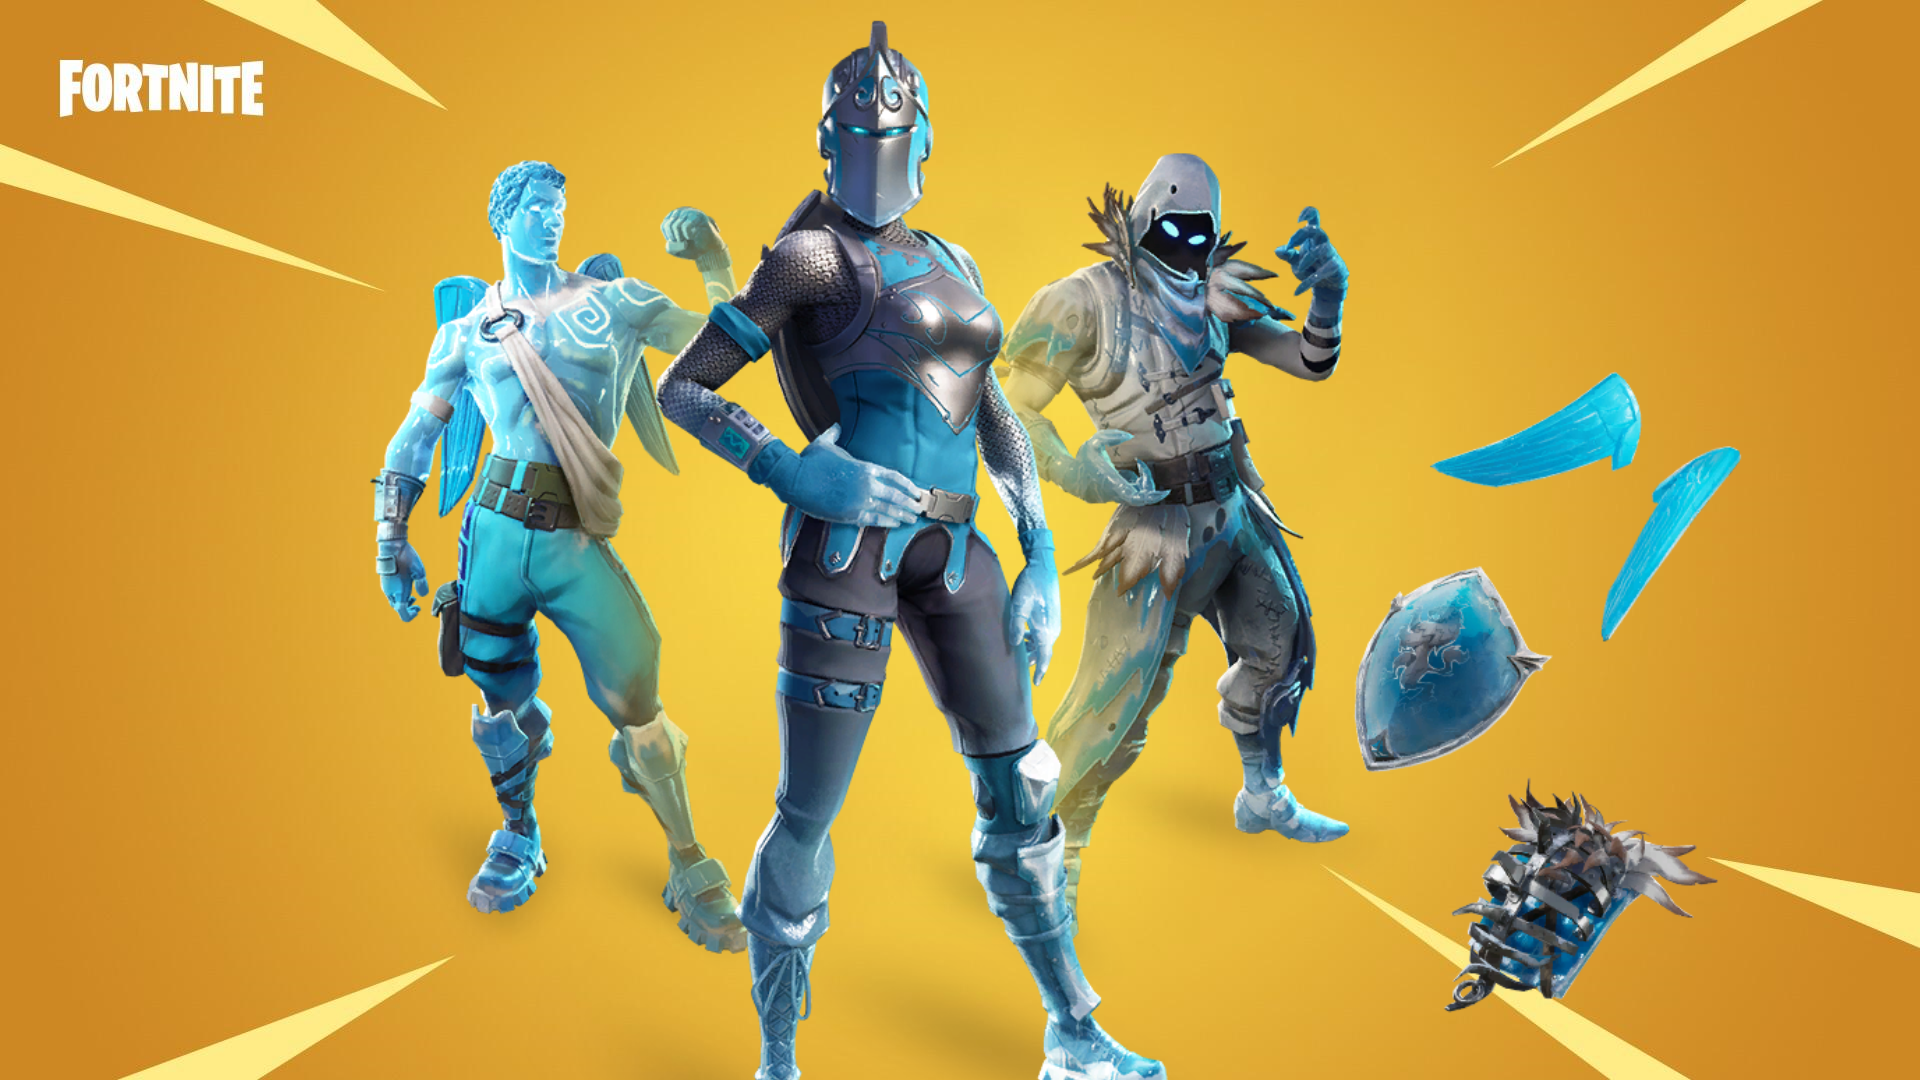 the frozen legends bundle might be on sale for real money only leaks show - frozen love wings fortnite